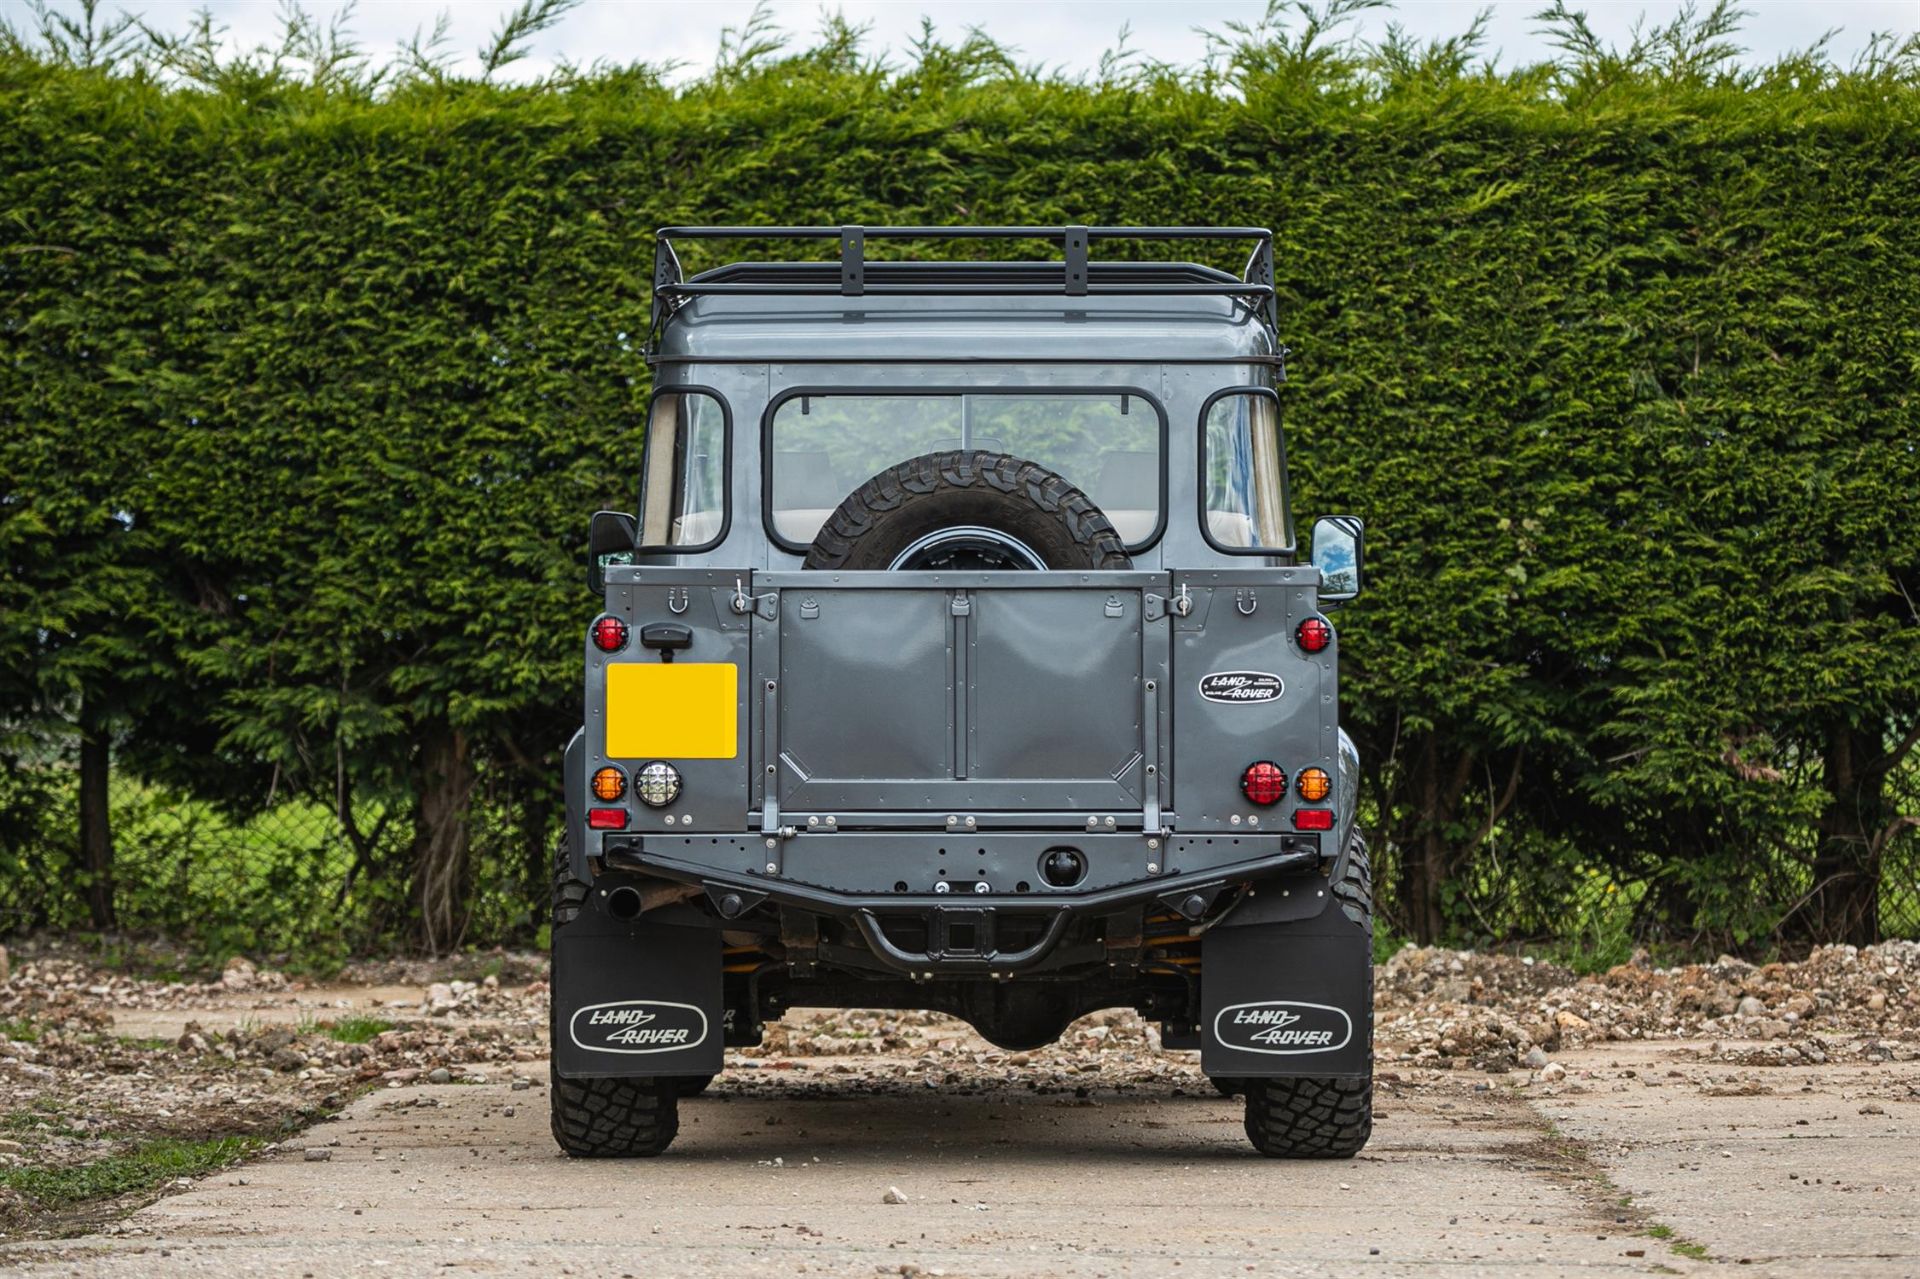 2002 Land Rover Defender 110 TD5 Double-Cab - Image 7 of 10